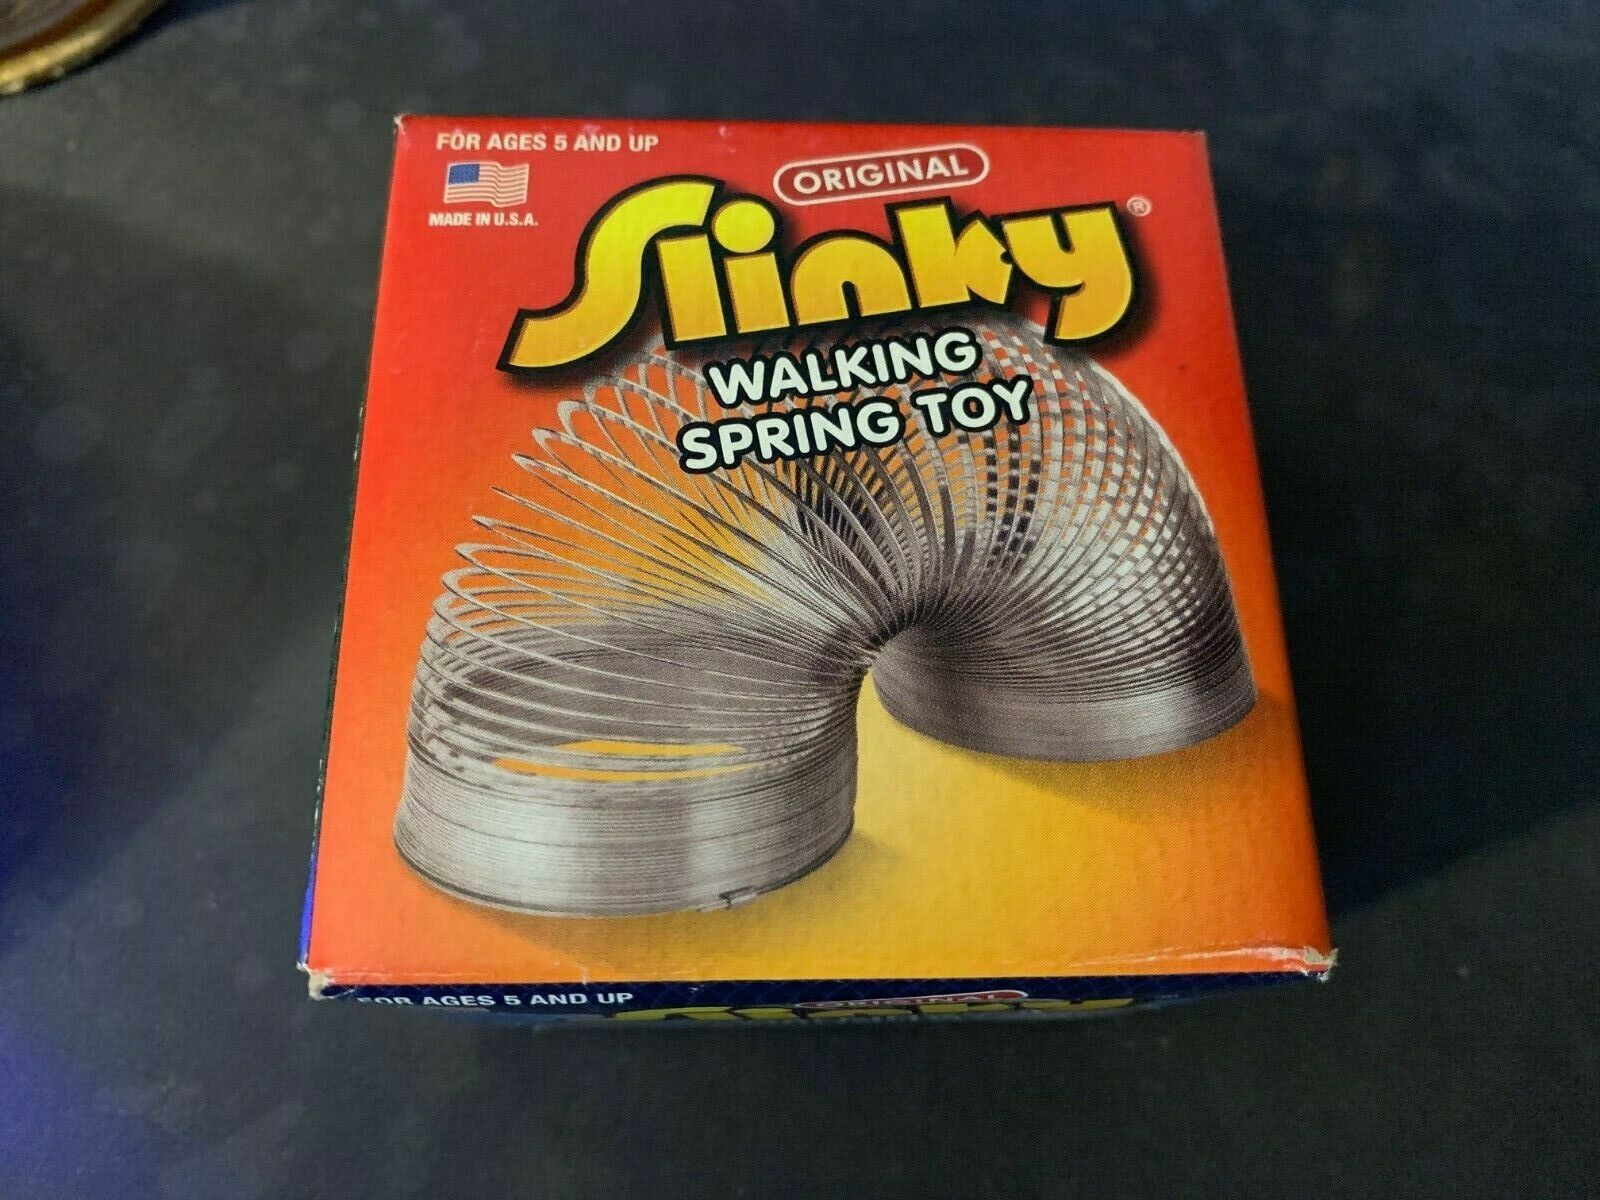 2011 Original Walking Spring Toy Metal Slinky Made in the USA New